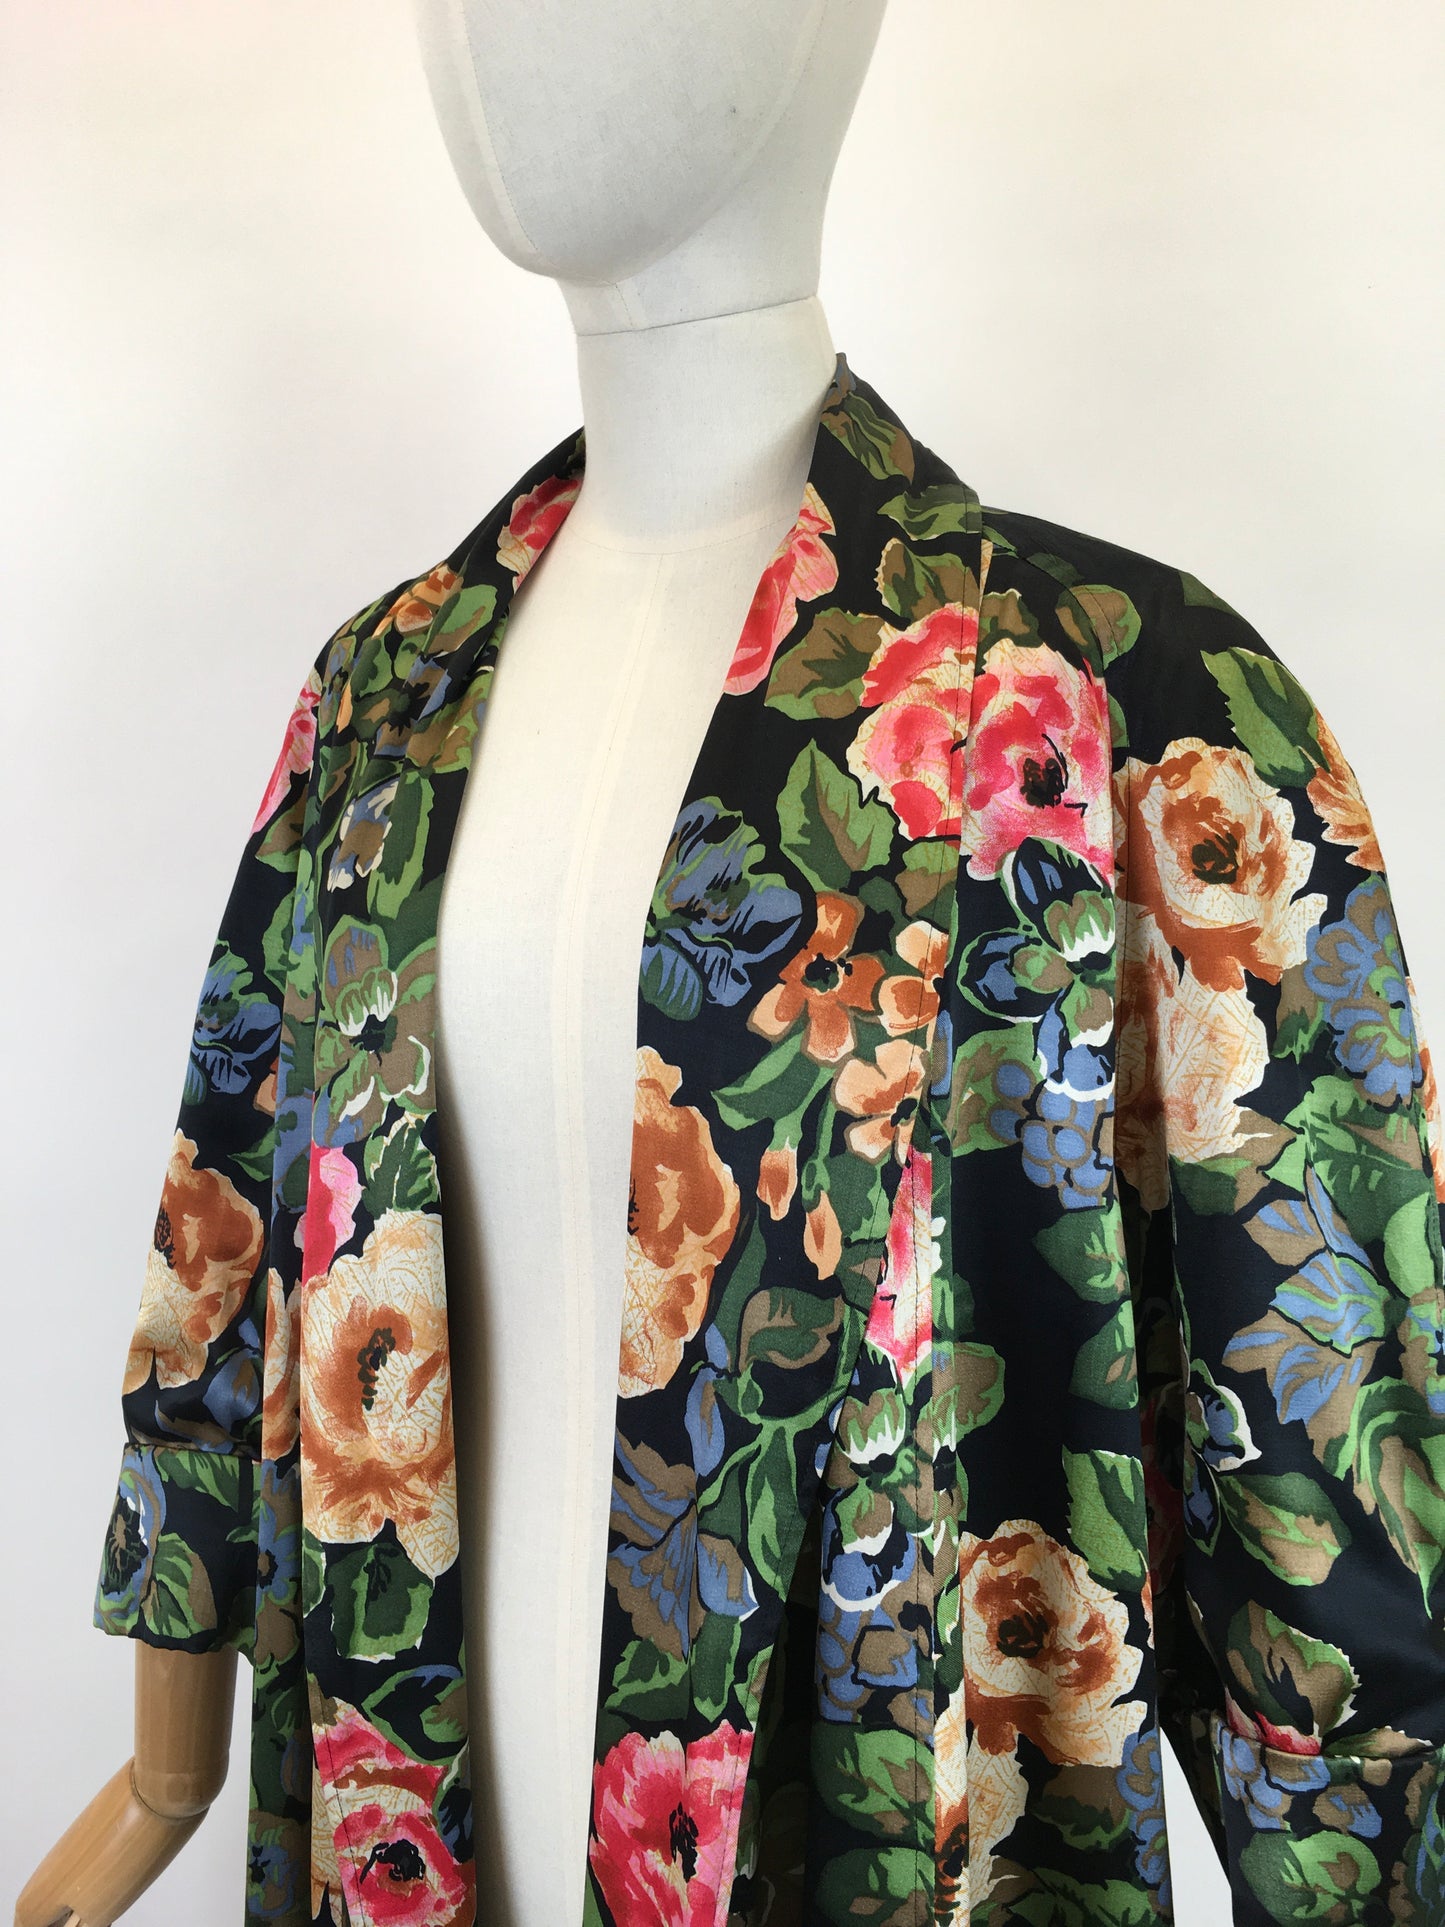 Original 1950’s SENSATIONAL ‘ Peter French’ Swagger Jacket - In Floral Bloom